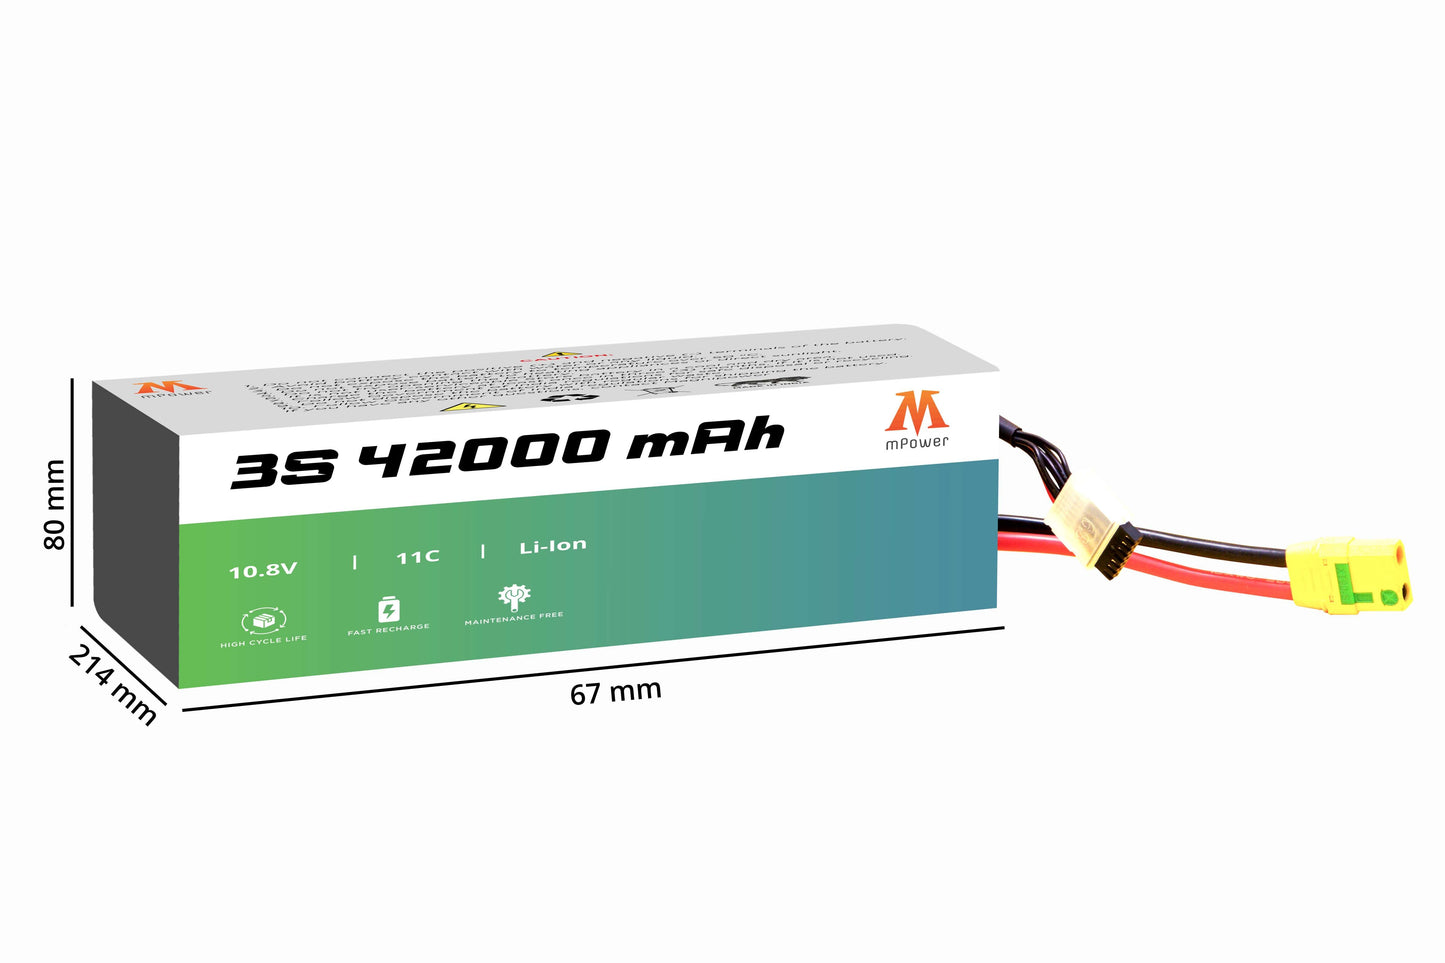 mPower 3S 42000mAh Lithium-Ion Battery for Surveillance Drones